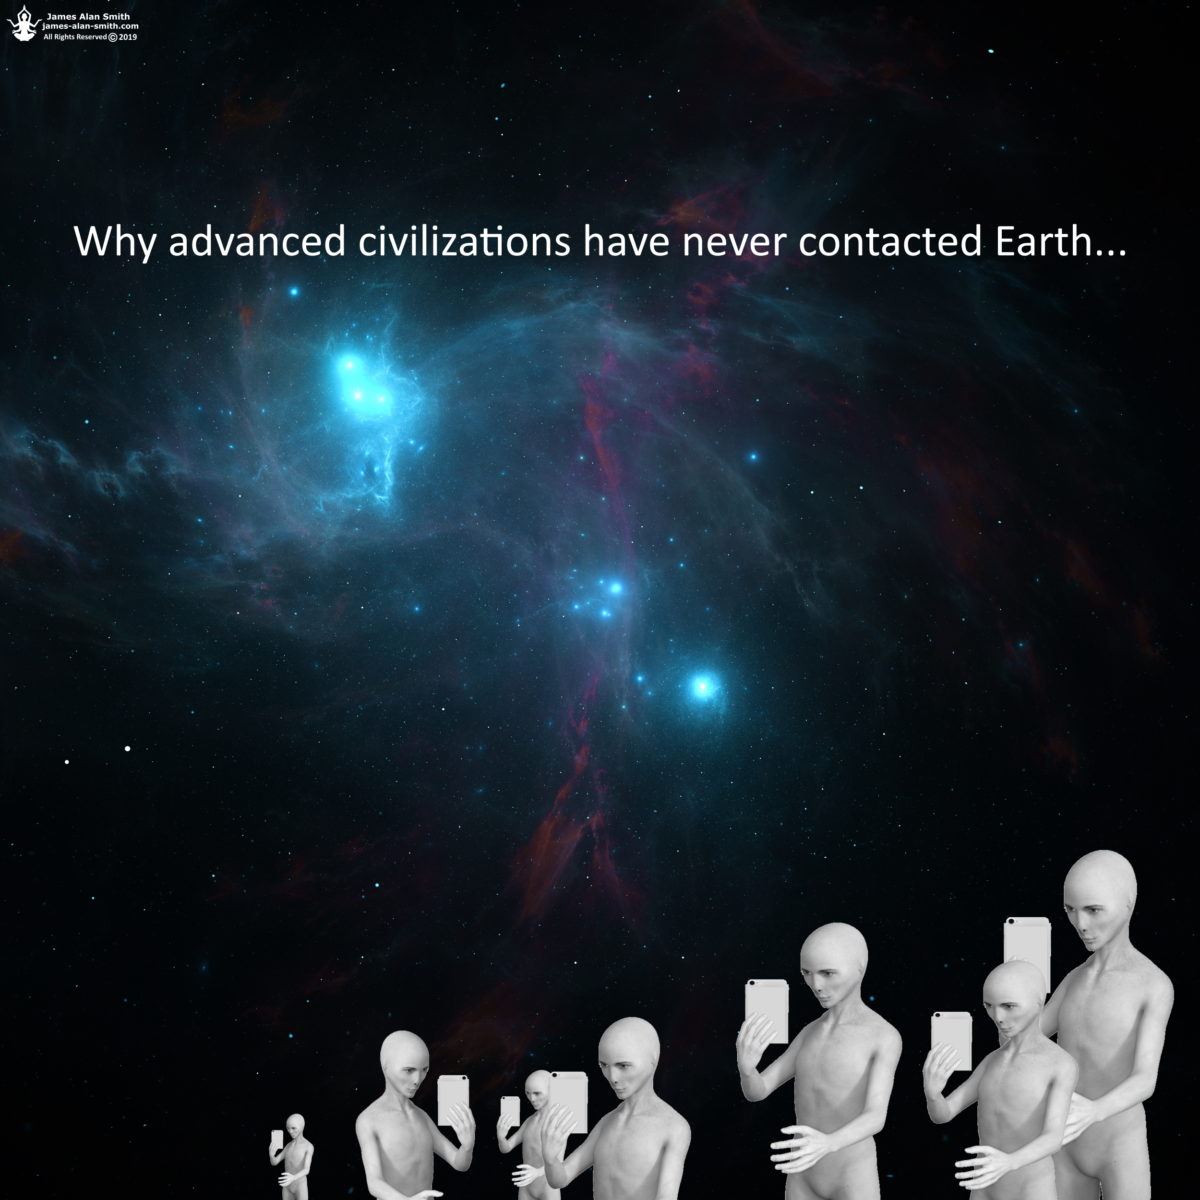 Why advanced civilizations have never contacted Earth: Artwork by James Alan Smith